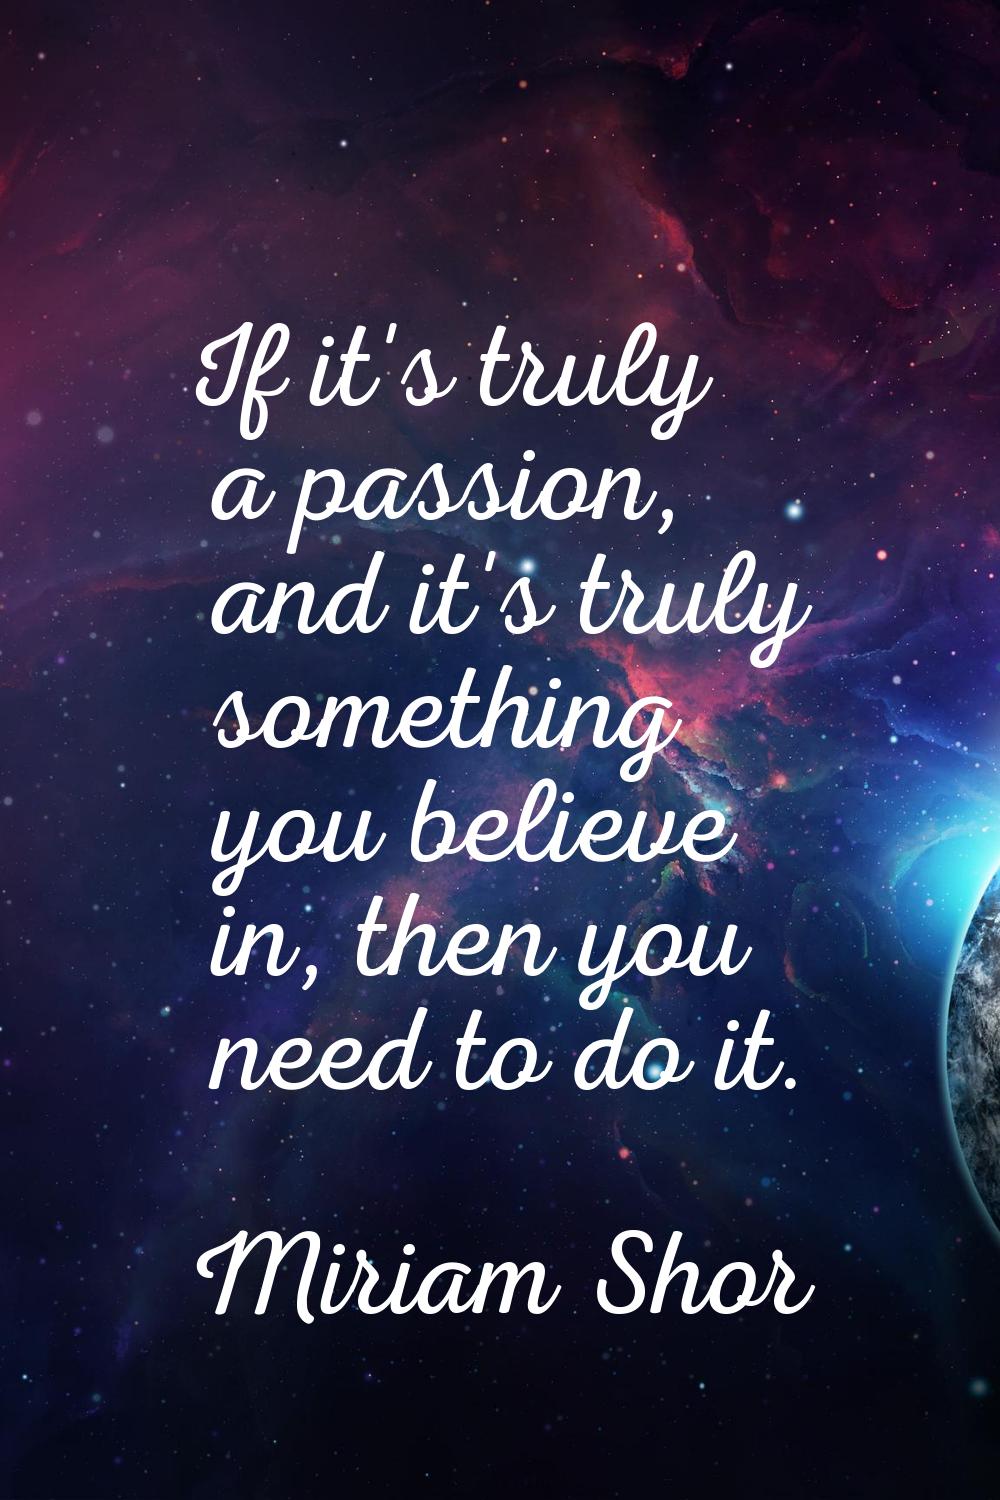 If it's truly a passion, and it's truly something you believe in, then you need to do it.